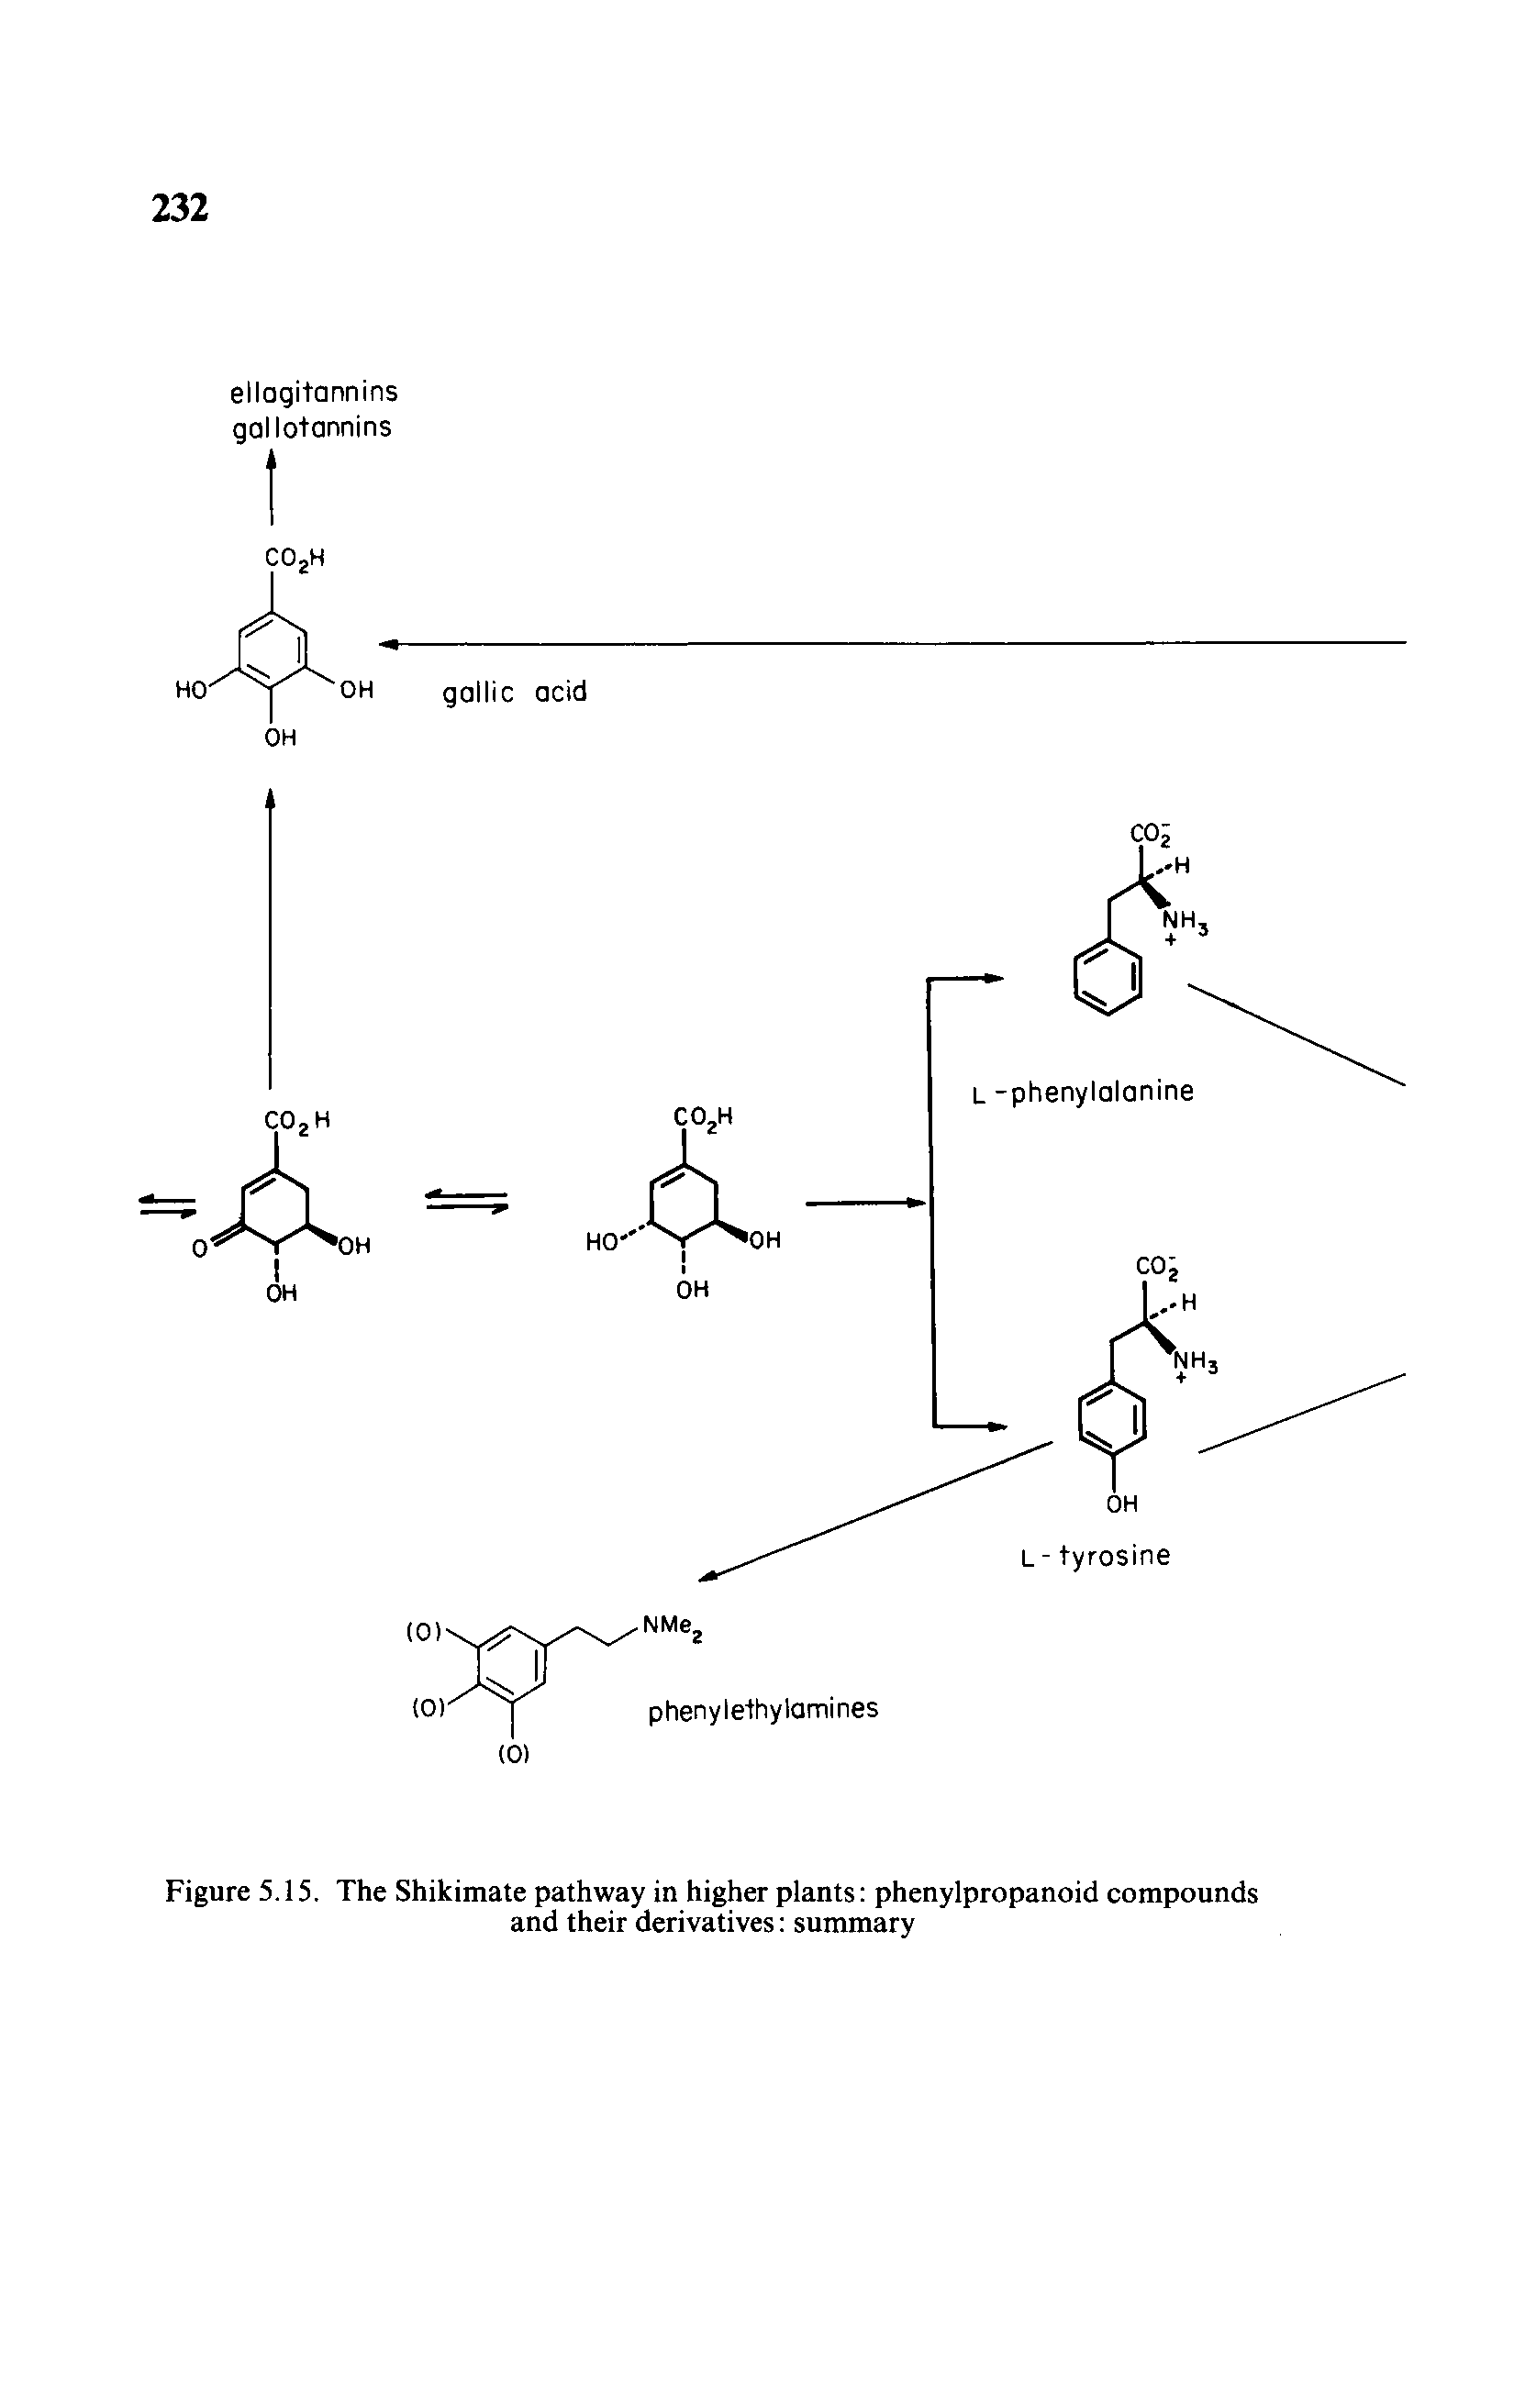 Figure 5.15, The Shikimate pathway in higher plants phenylpropanoid compounds and their derivatives summary...